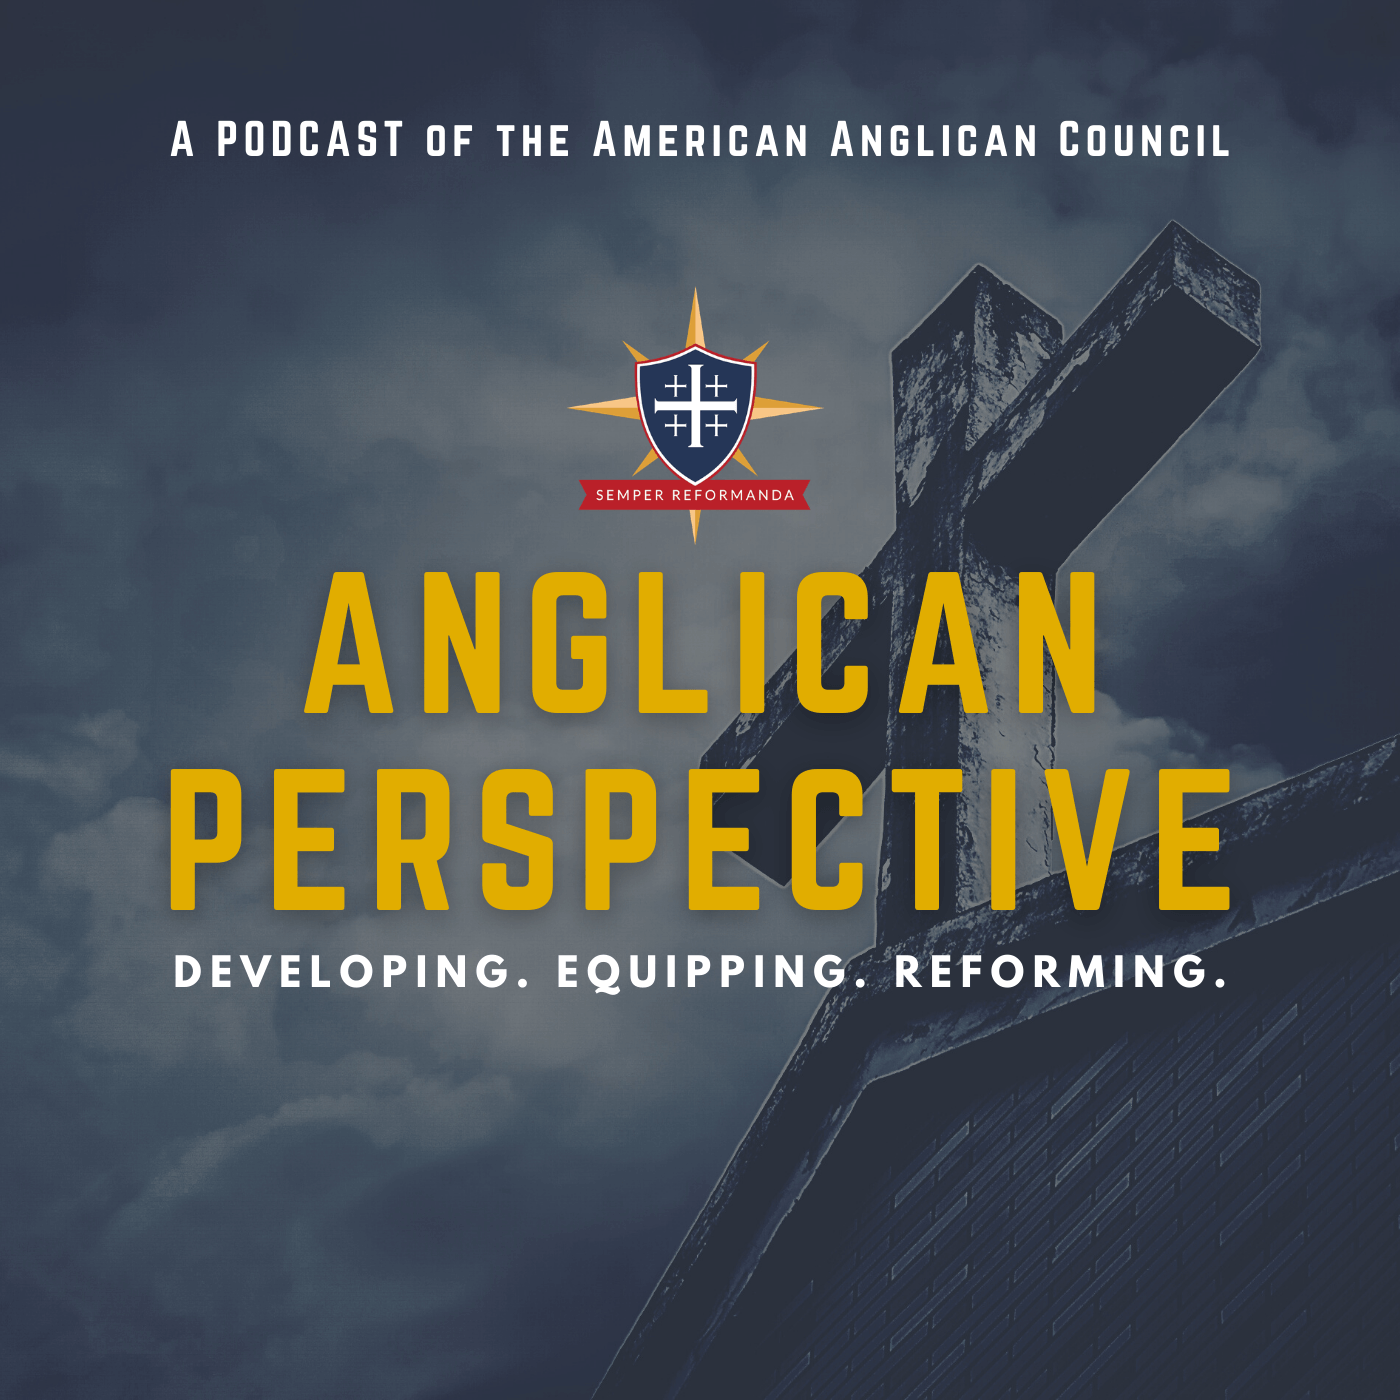 The New Anglican Perspective Podcast